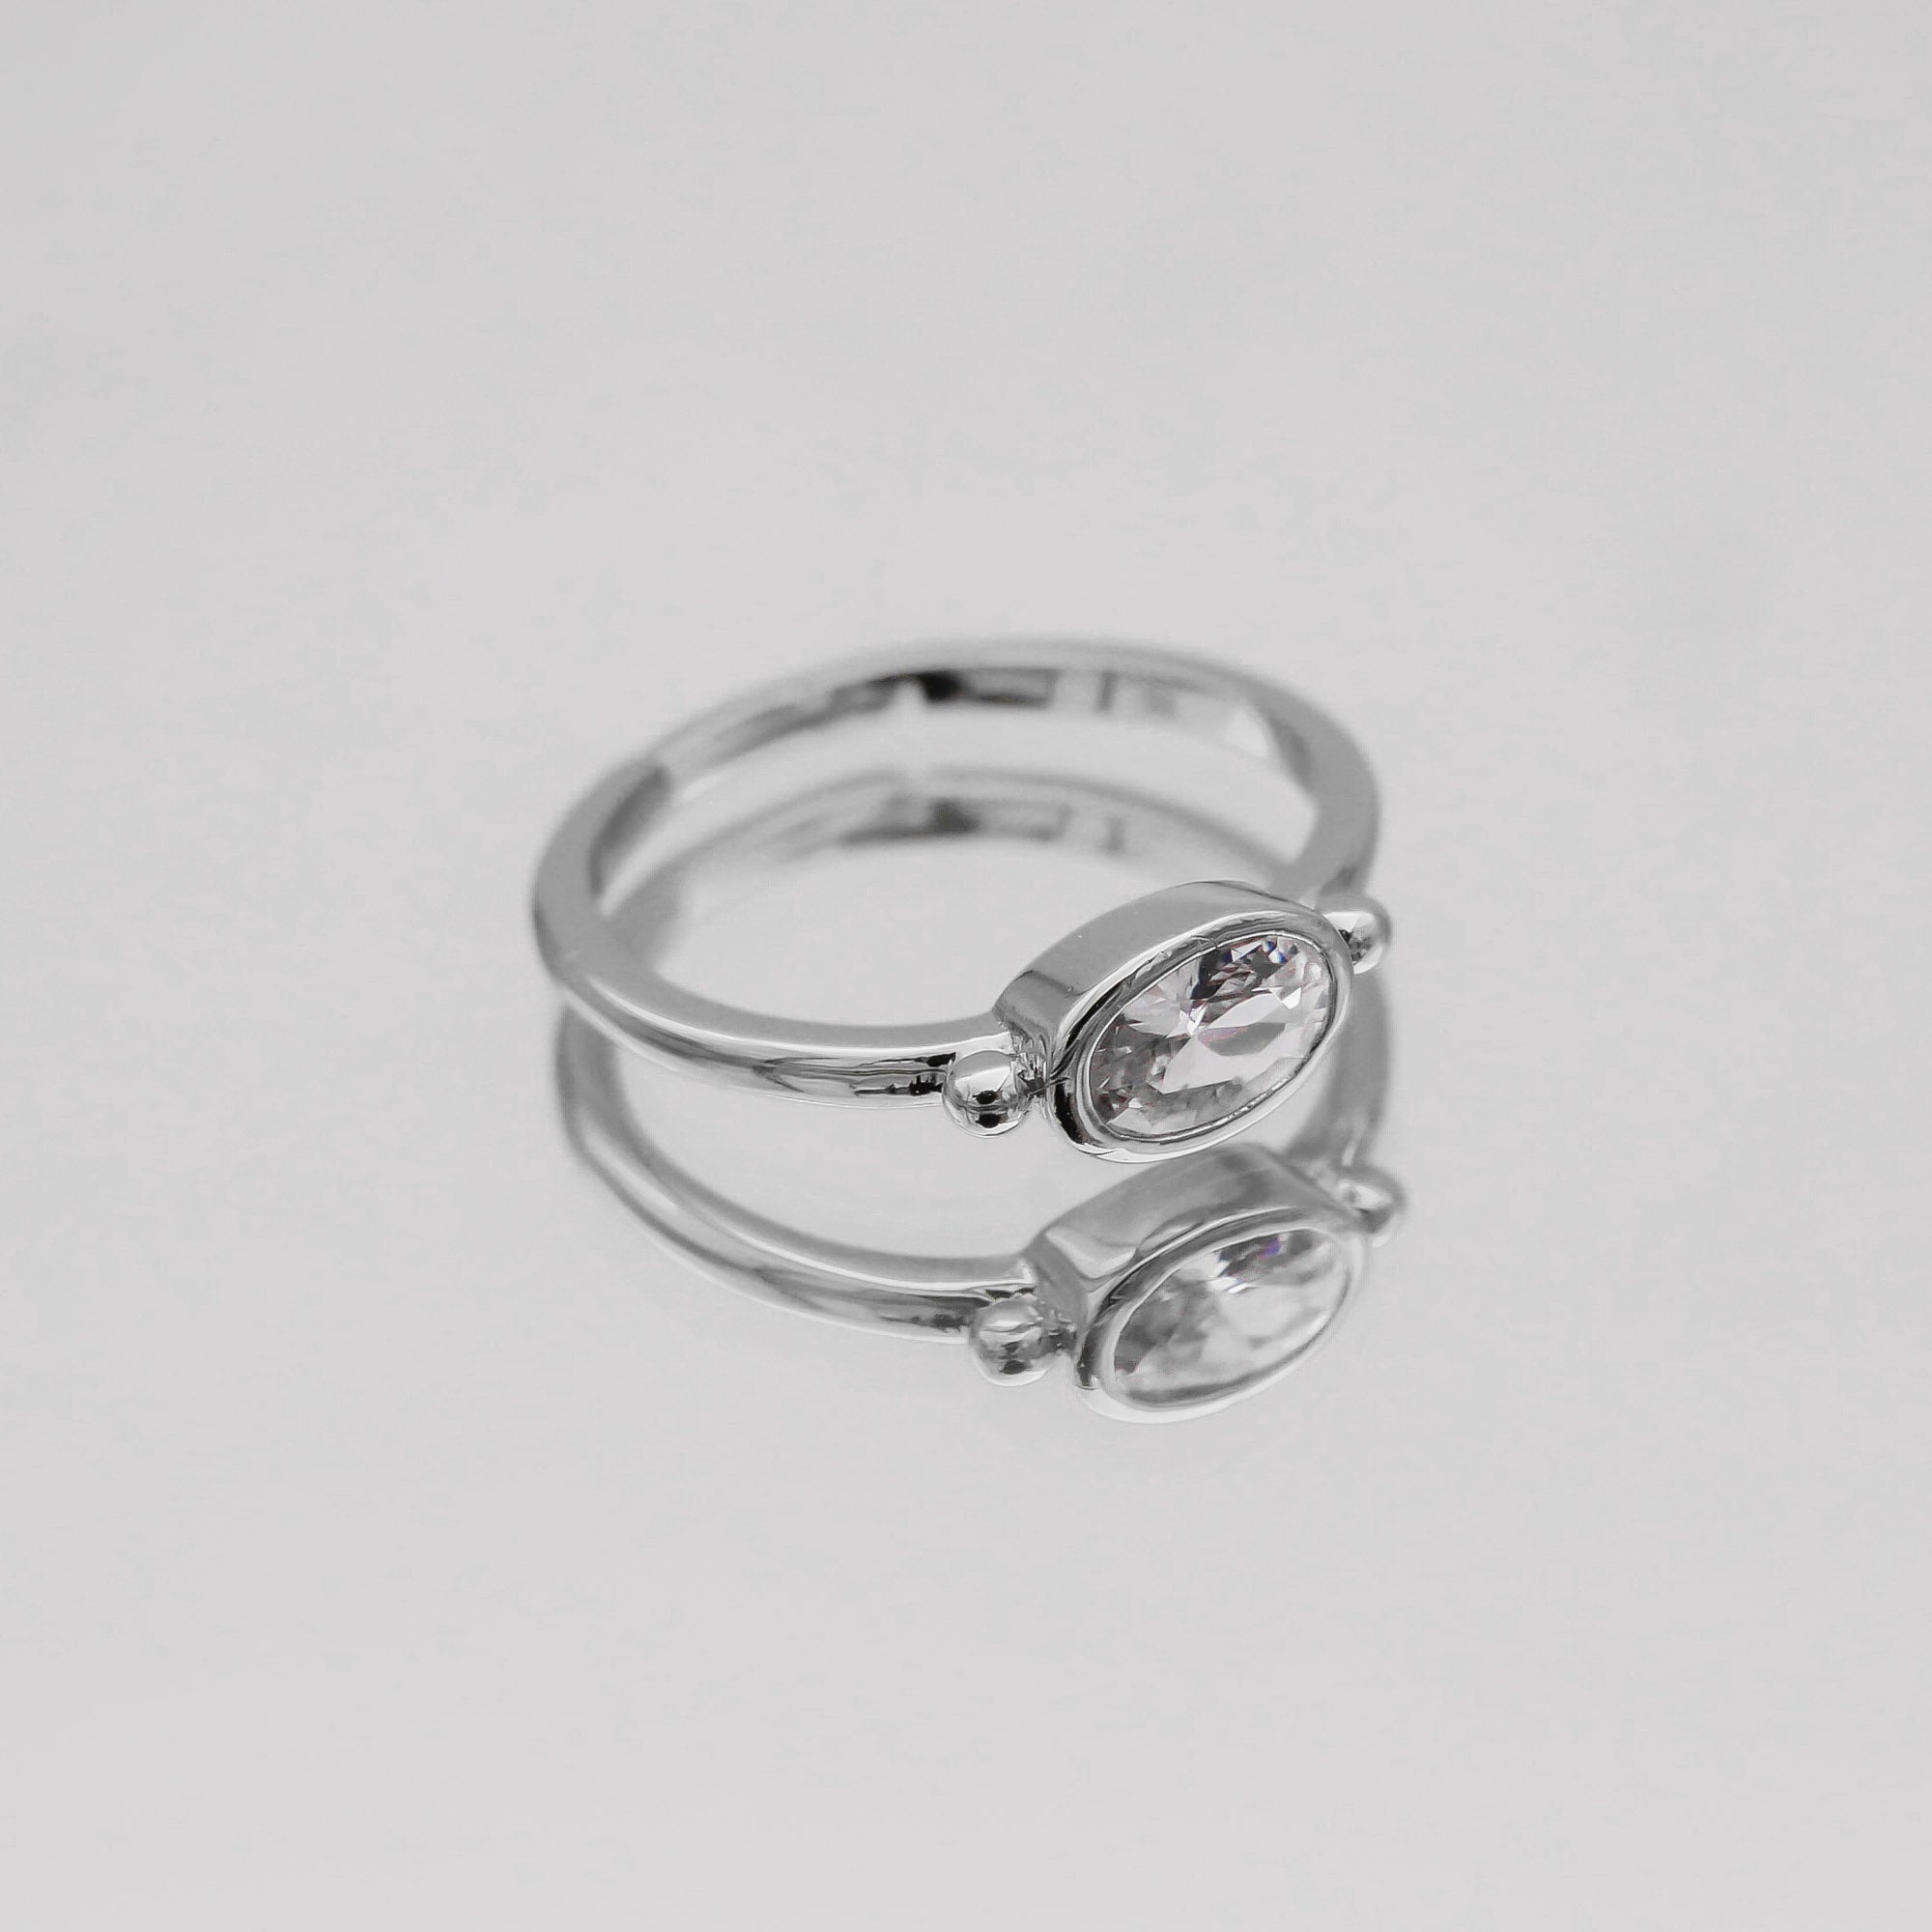 Birthstone ring silver for April